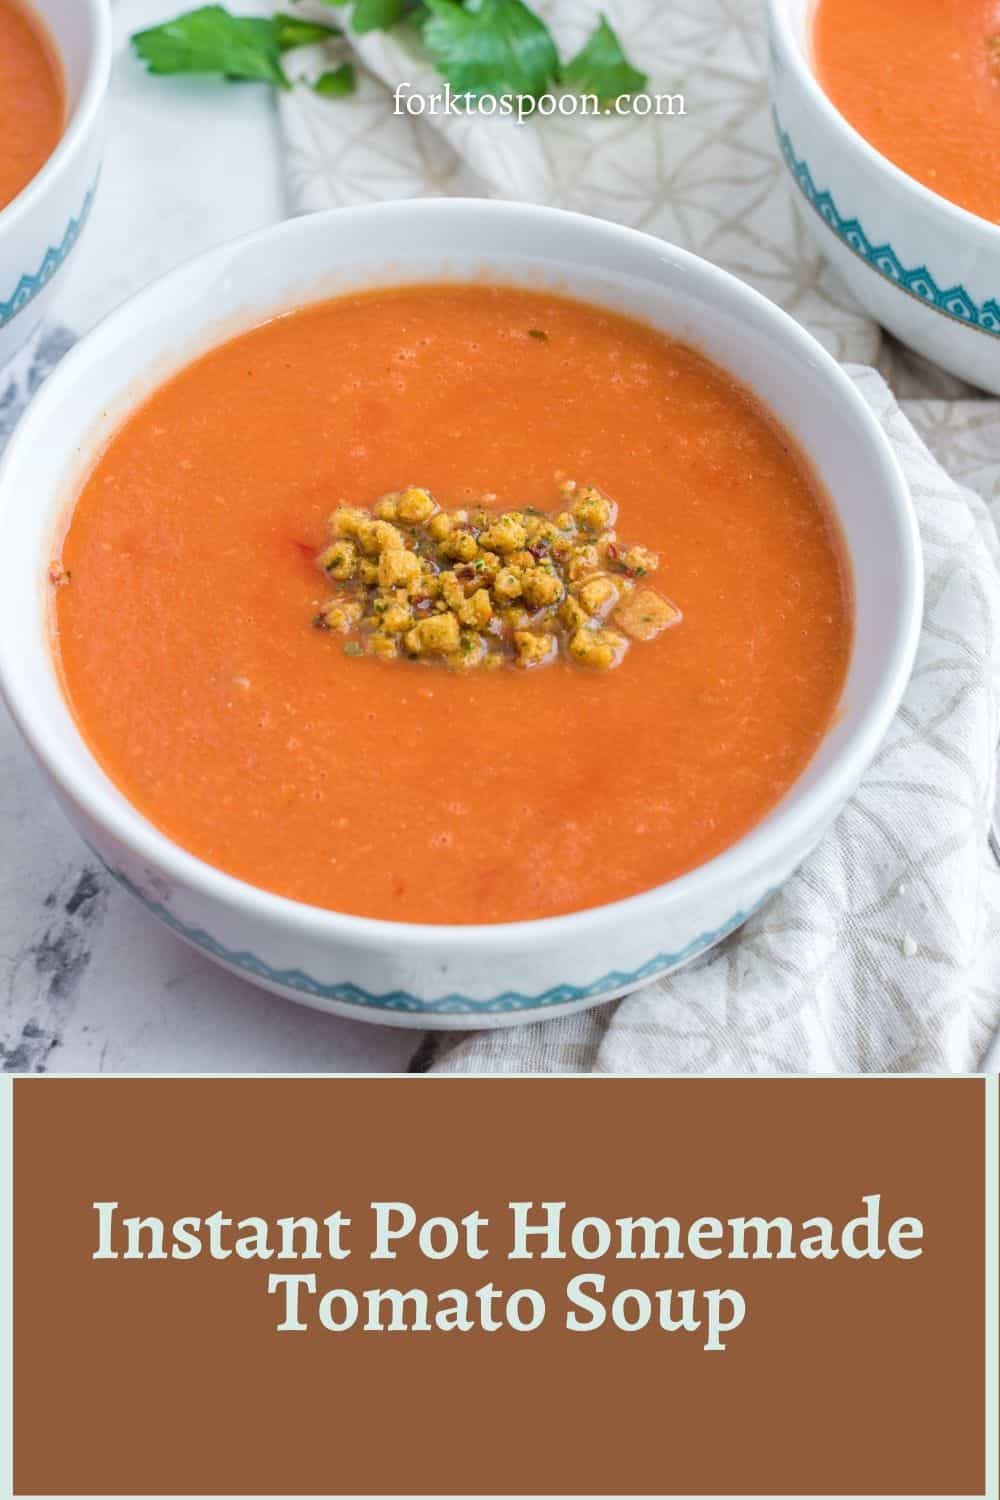 Instant Pot Homemade Tomato Soup - Fork To Spoon